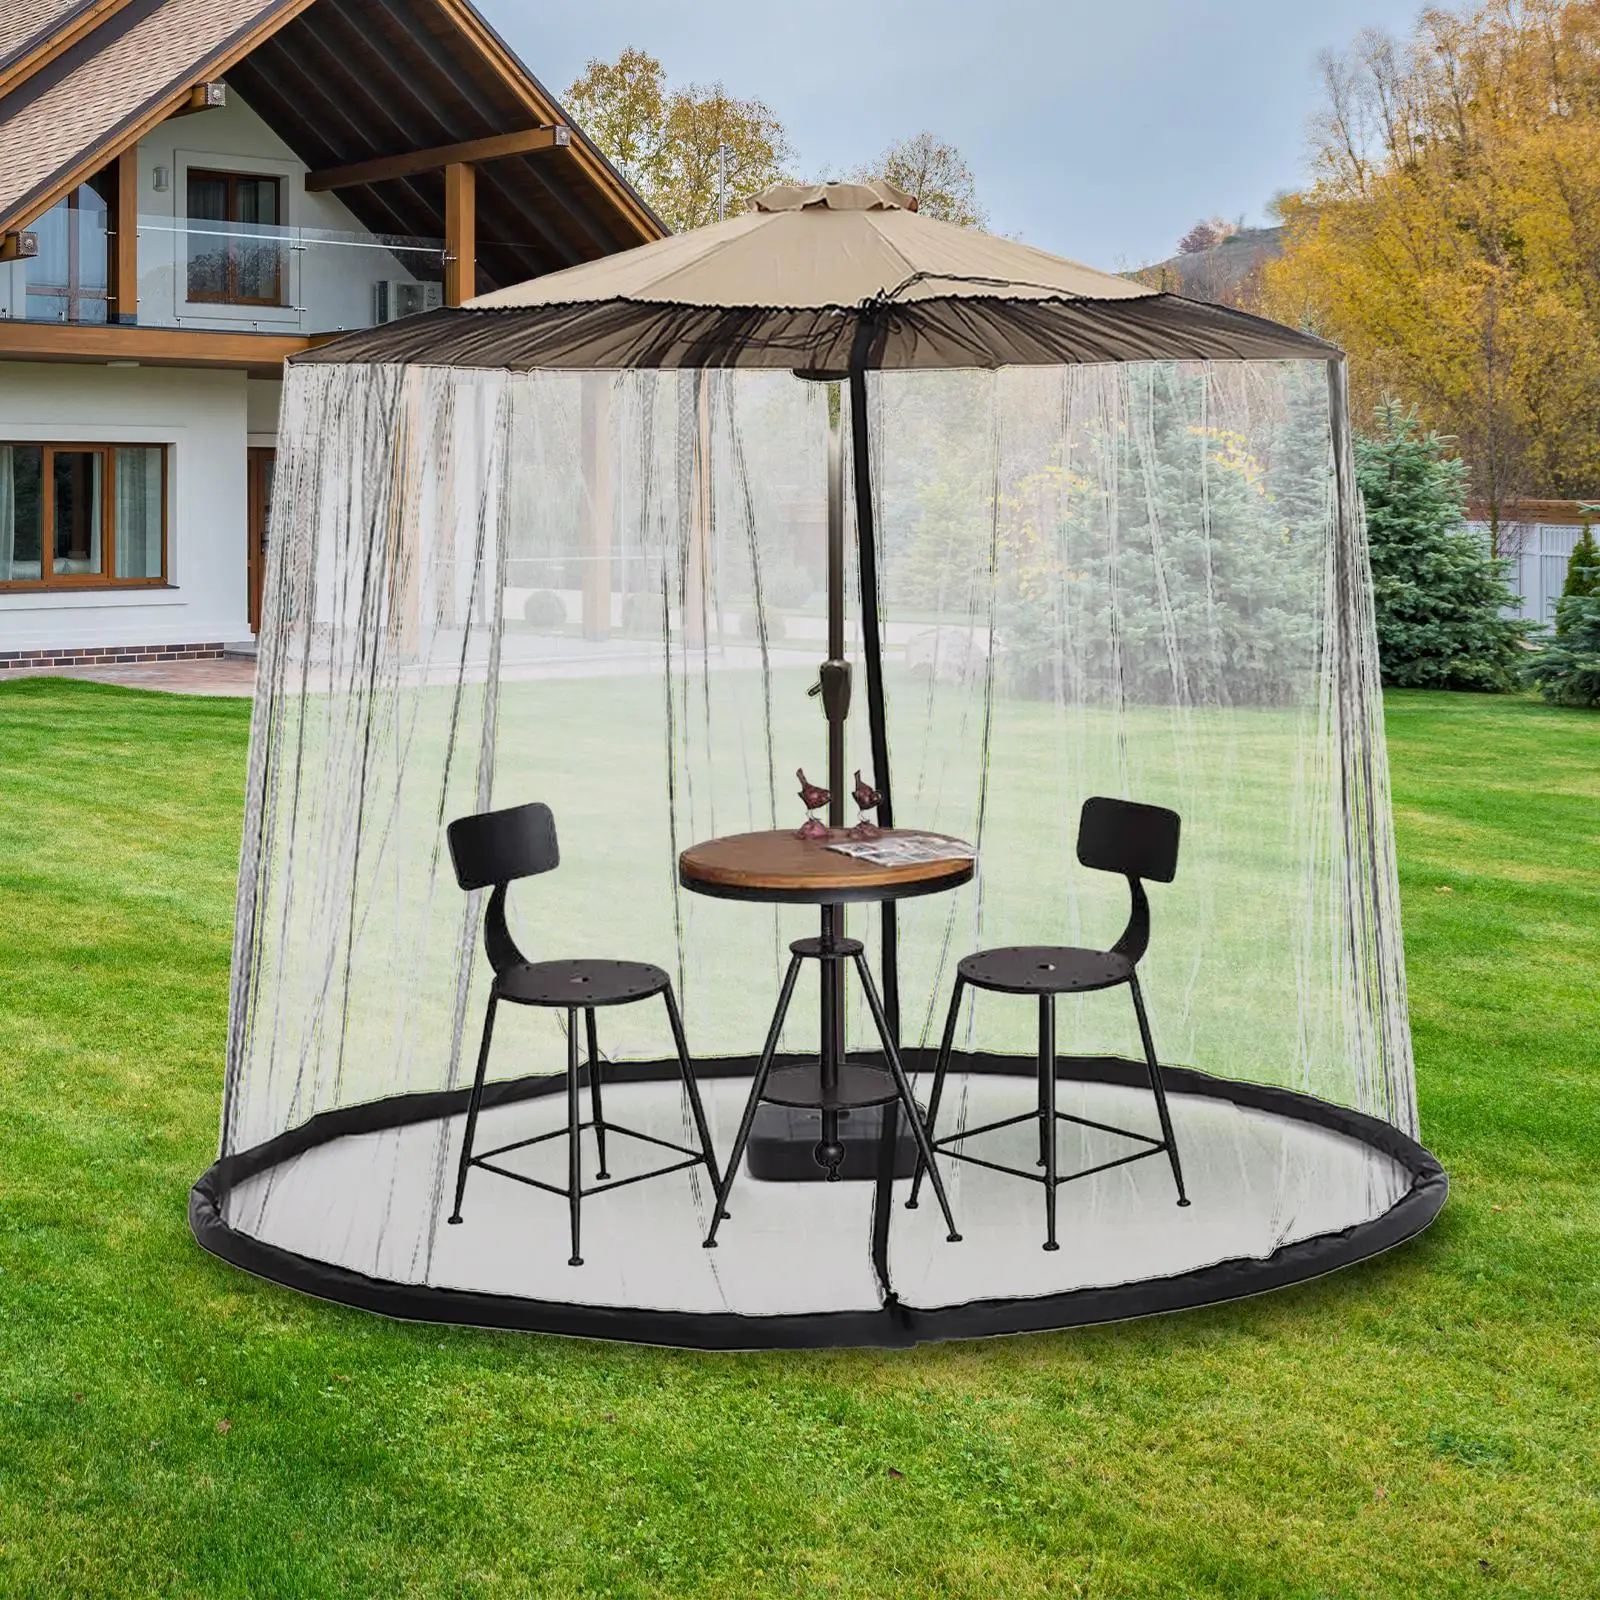 Patio Umbrella Netting Portable Garden Covers Adjustable Rope Curtains Tent Mesh for Journey Picnic Fishing Table Umbrellas